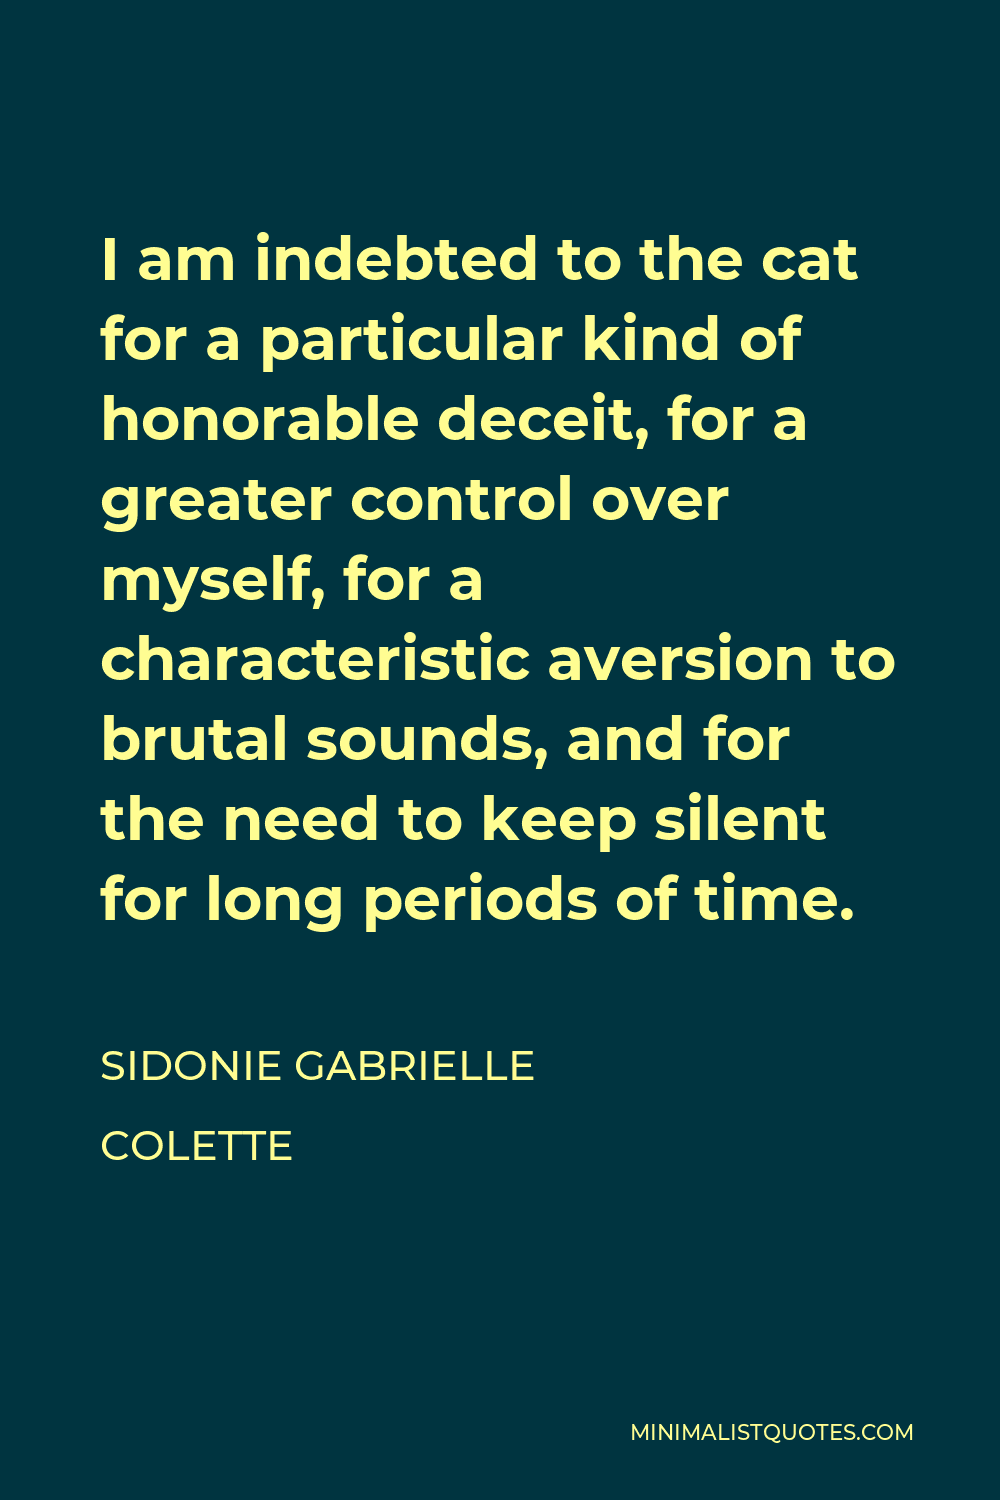 Sidonie Gabrielle Colette Quote - I am indebted to the cat for a particular kind of honorable deceit, for a greater control over myself, for a characteristic aversion to brutal sounds, and for the need to keep silent for long periods of time.